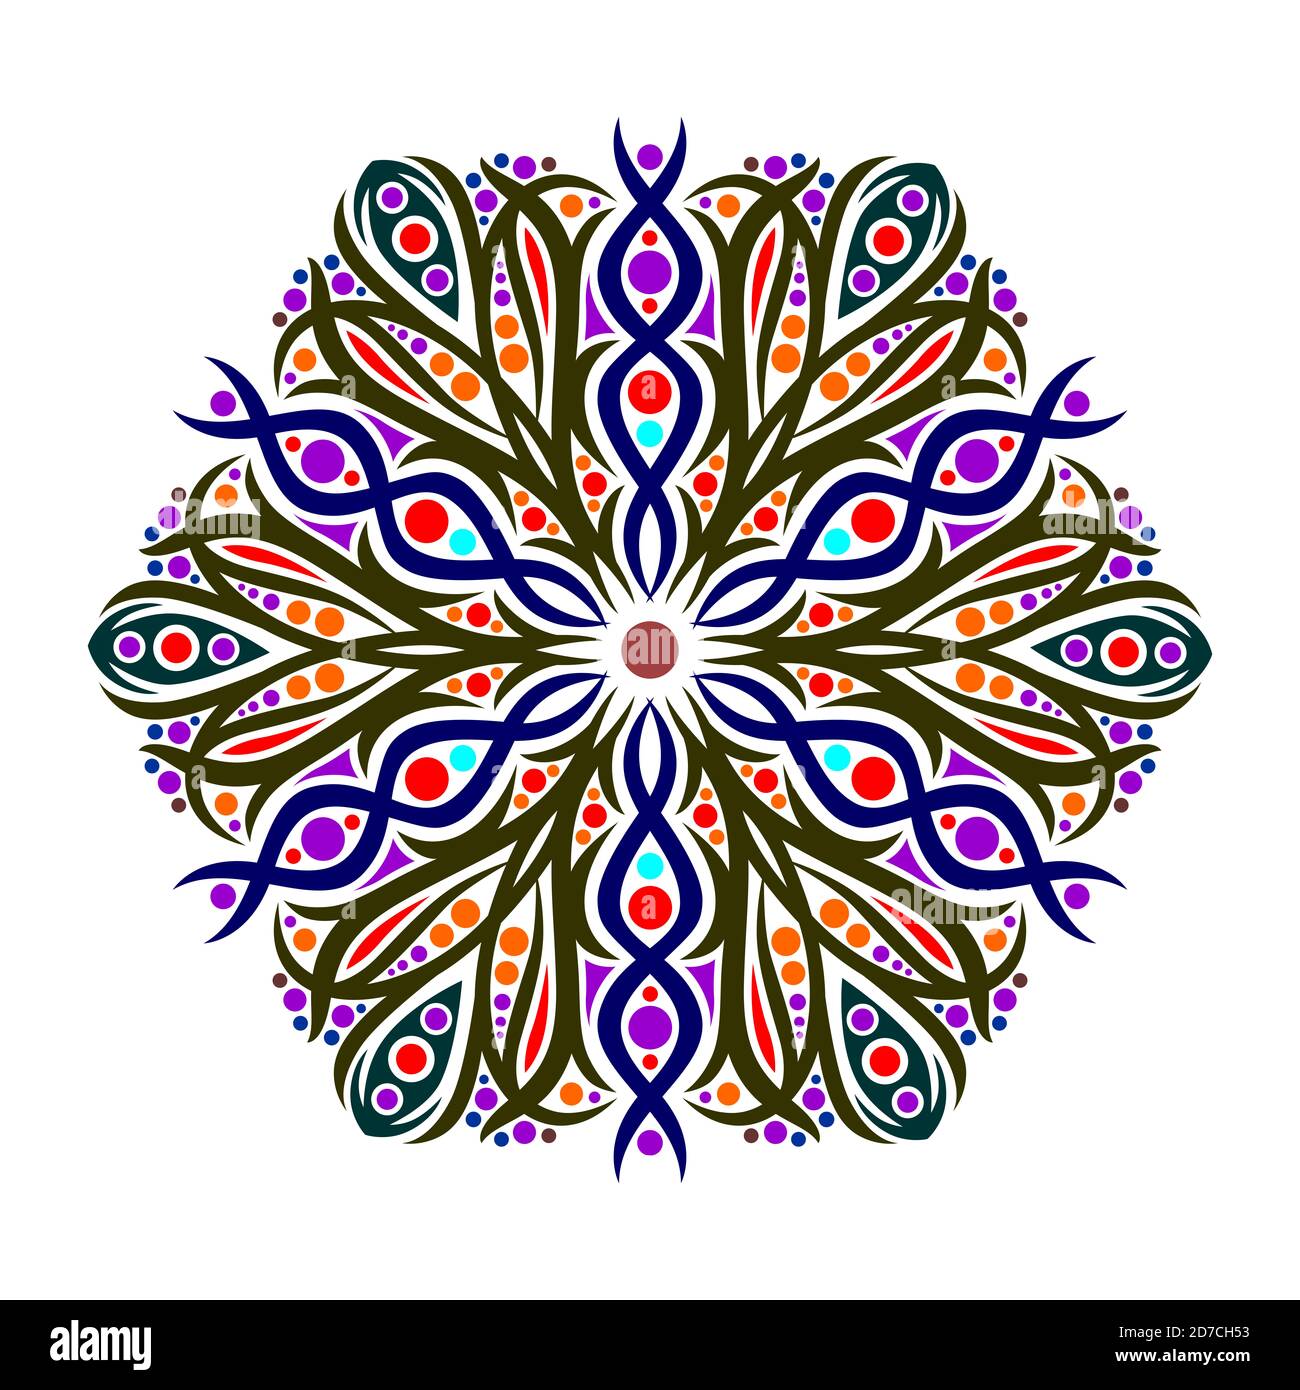 This is a work of mandala art made in as much detail as possible and combined with fariatic colors to create the maximum shape. files in eps format. Stock Photo